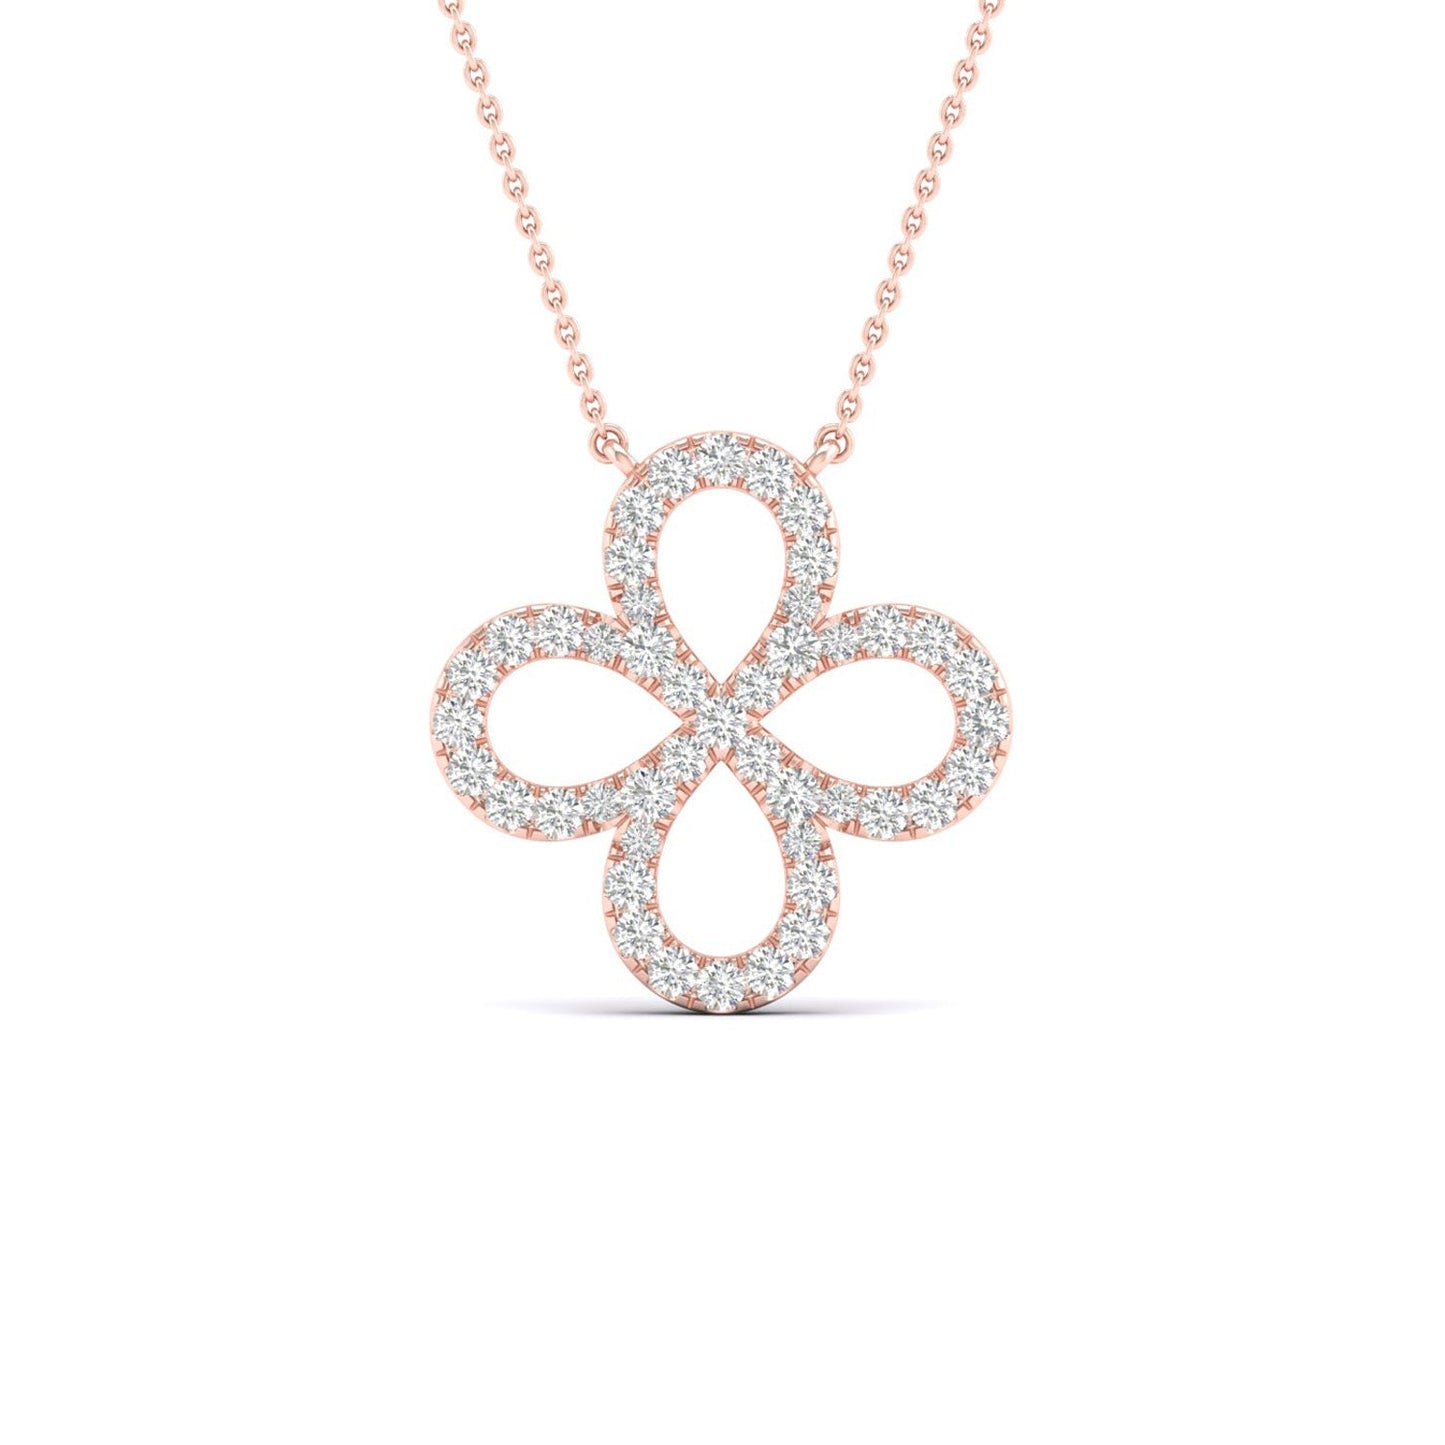 Infinity-Clover Silhouette Necklace_Product Angle_1/4 - 1